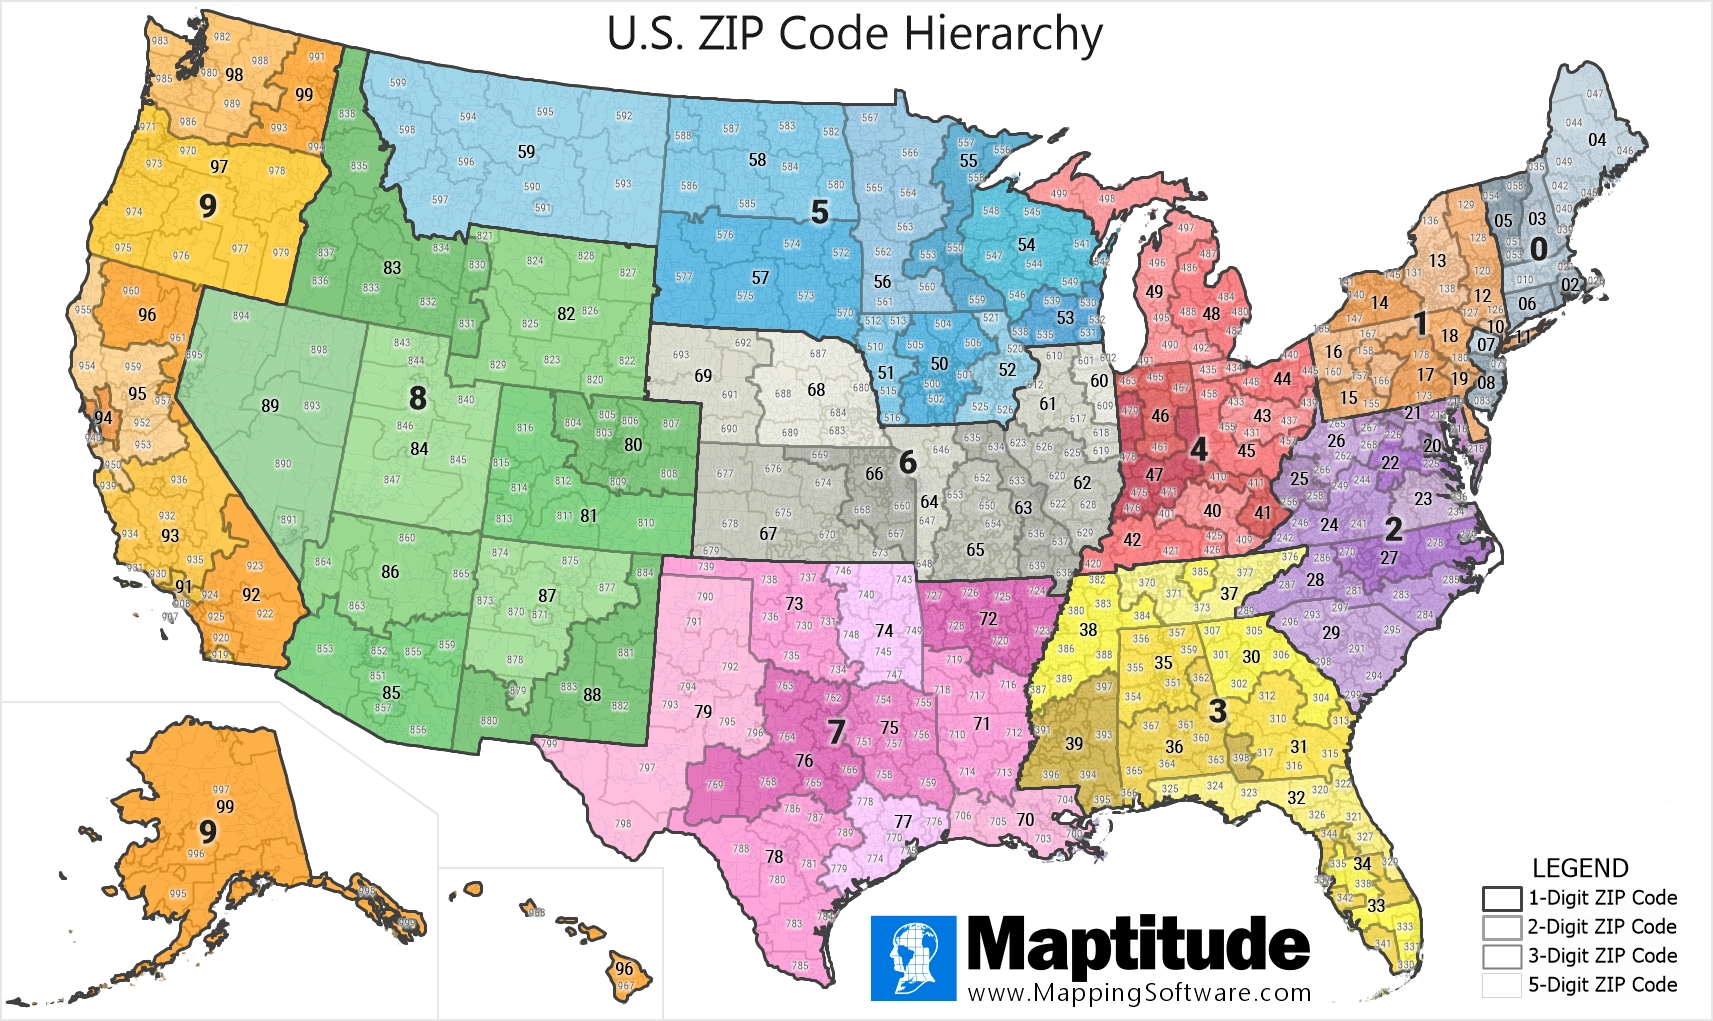 Maptitude mapping software infographic of Geographical Hierarchy of ZIP Codes